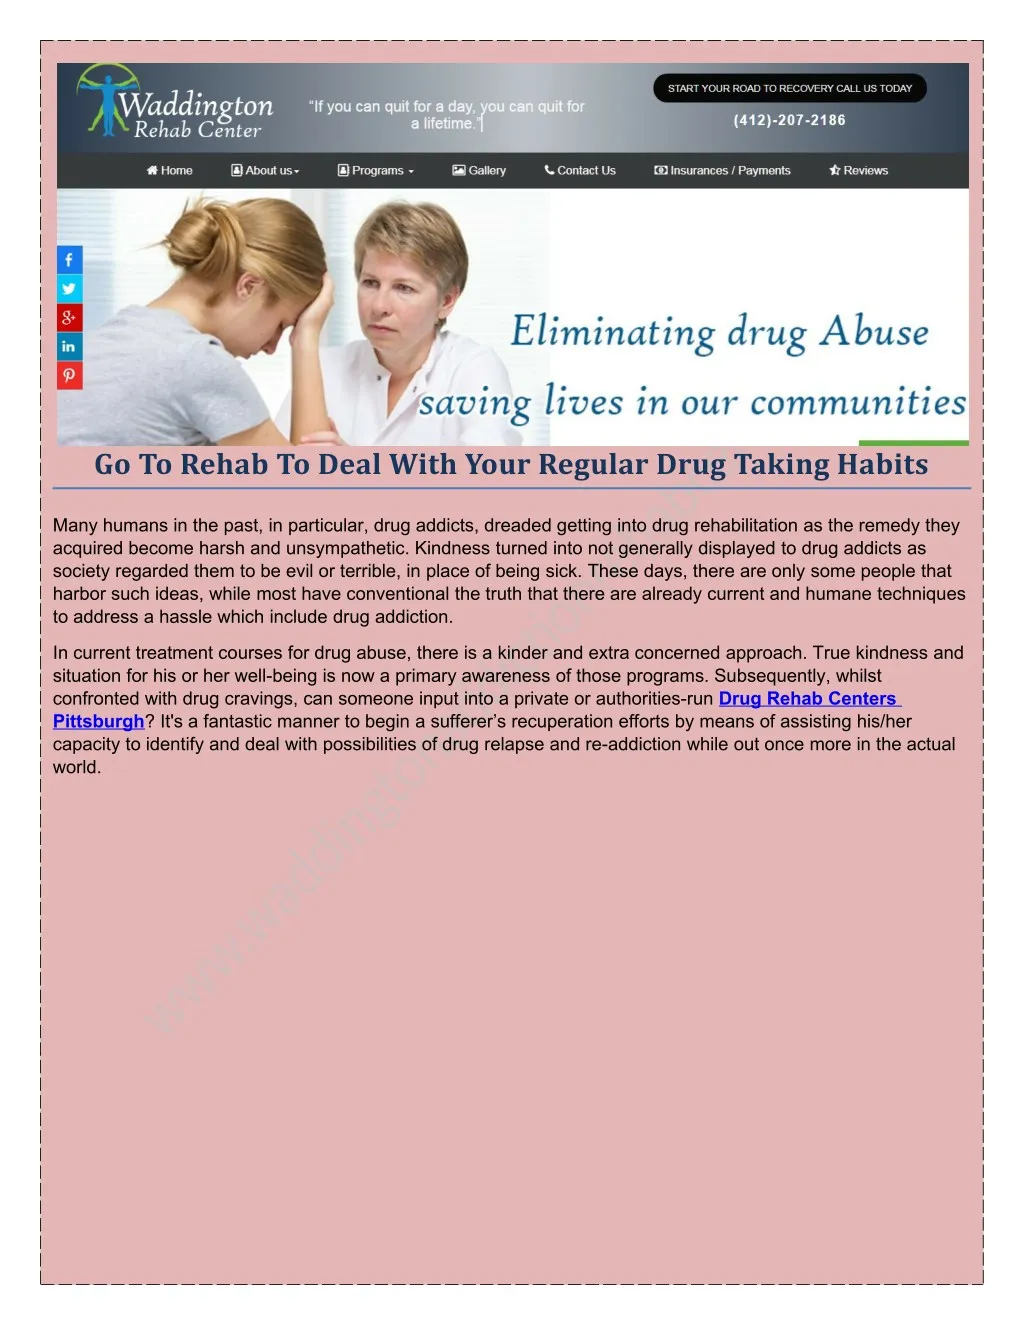 go to rehab to deal with your regular drug taking